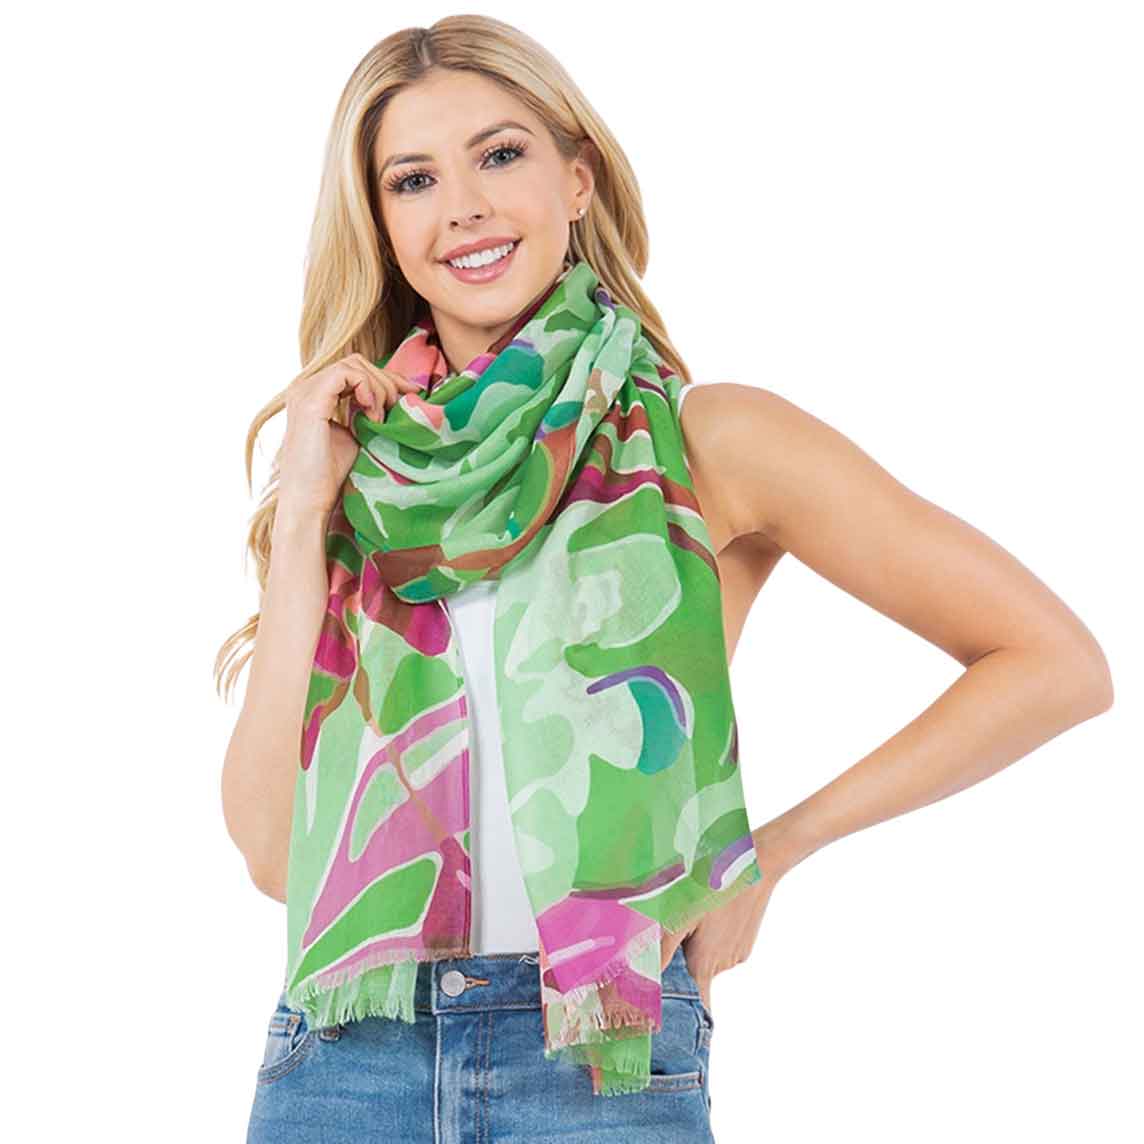 3861 - Assorted Cotton Feel Summer Scarves 4281-03
Abstract Pattern Scarf - 33